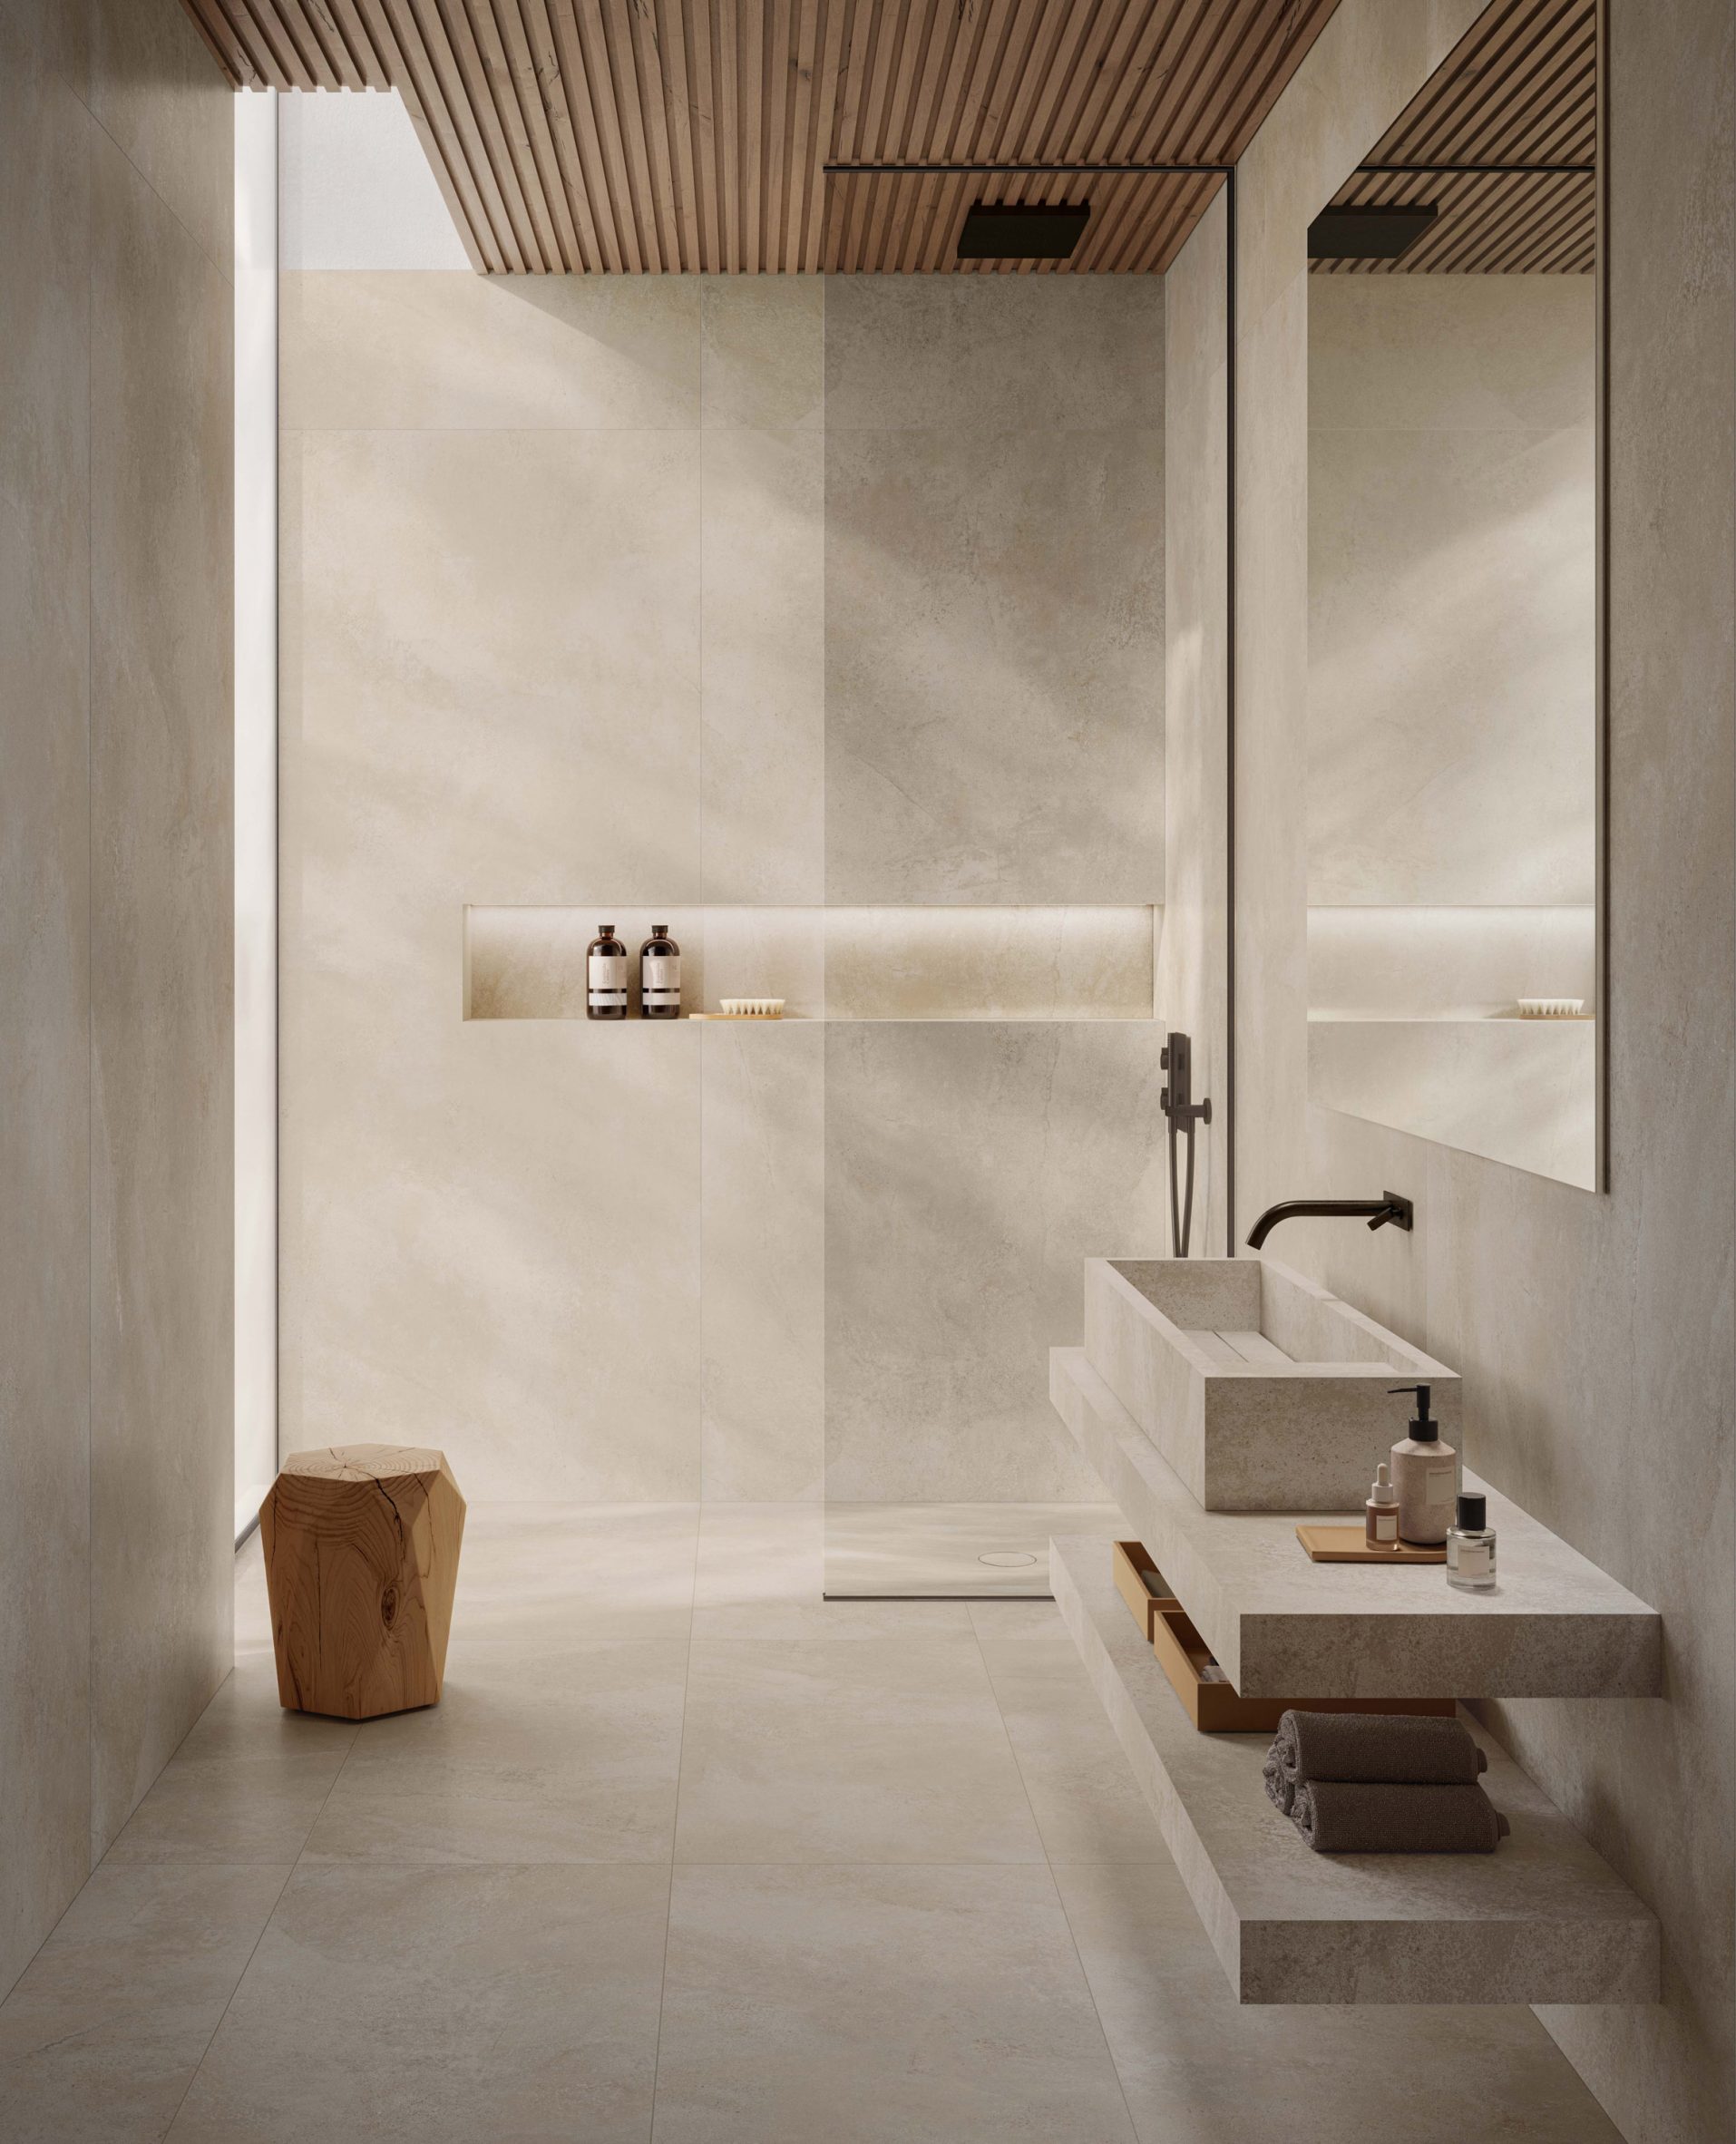 Bathroom with neutral-coloured stone finishes and wooden ceiling